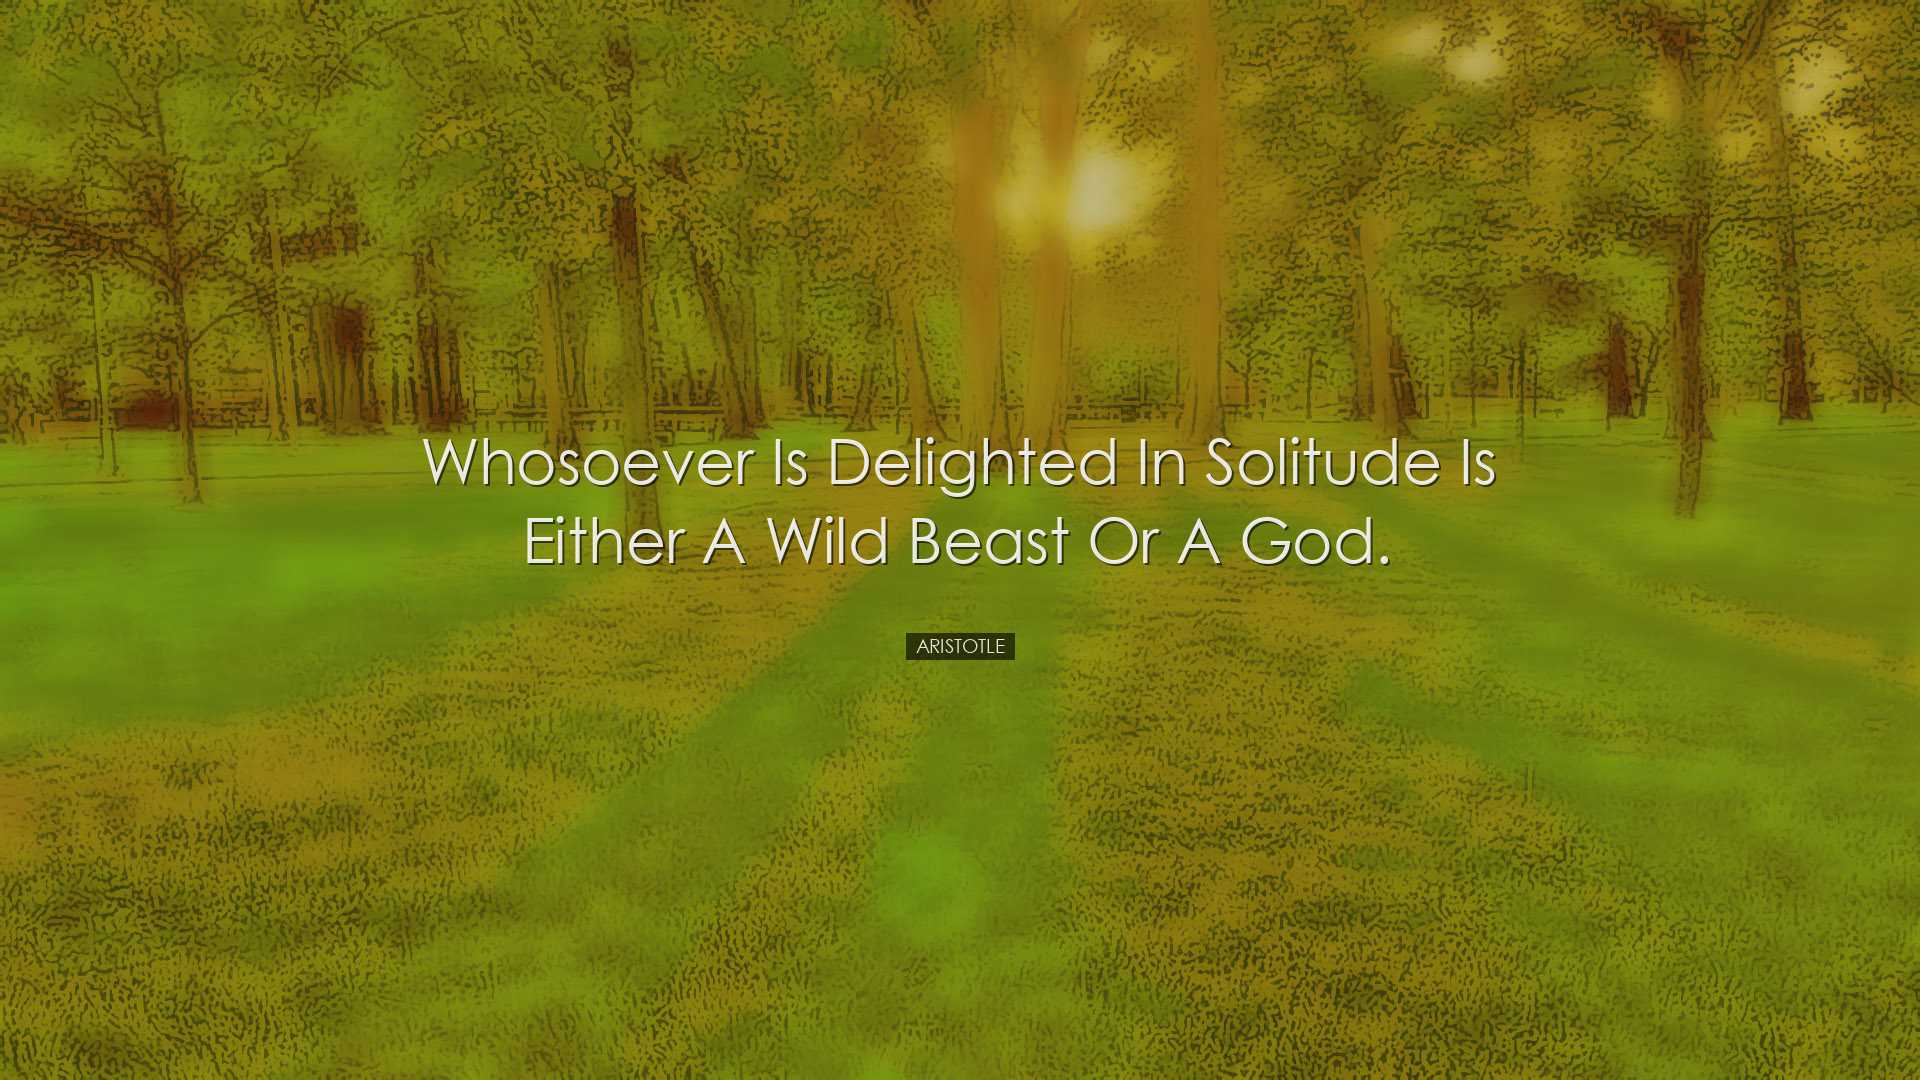 Whosoever is delighted in solitude is either a wild beast or a god